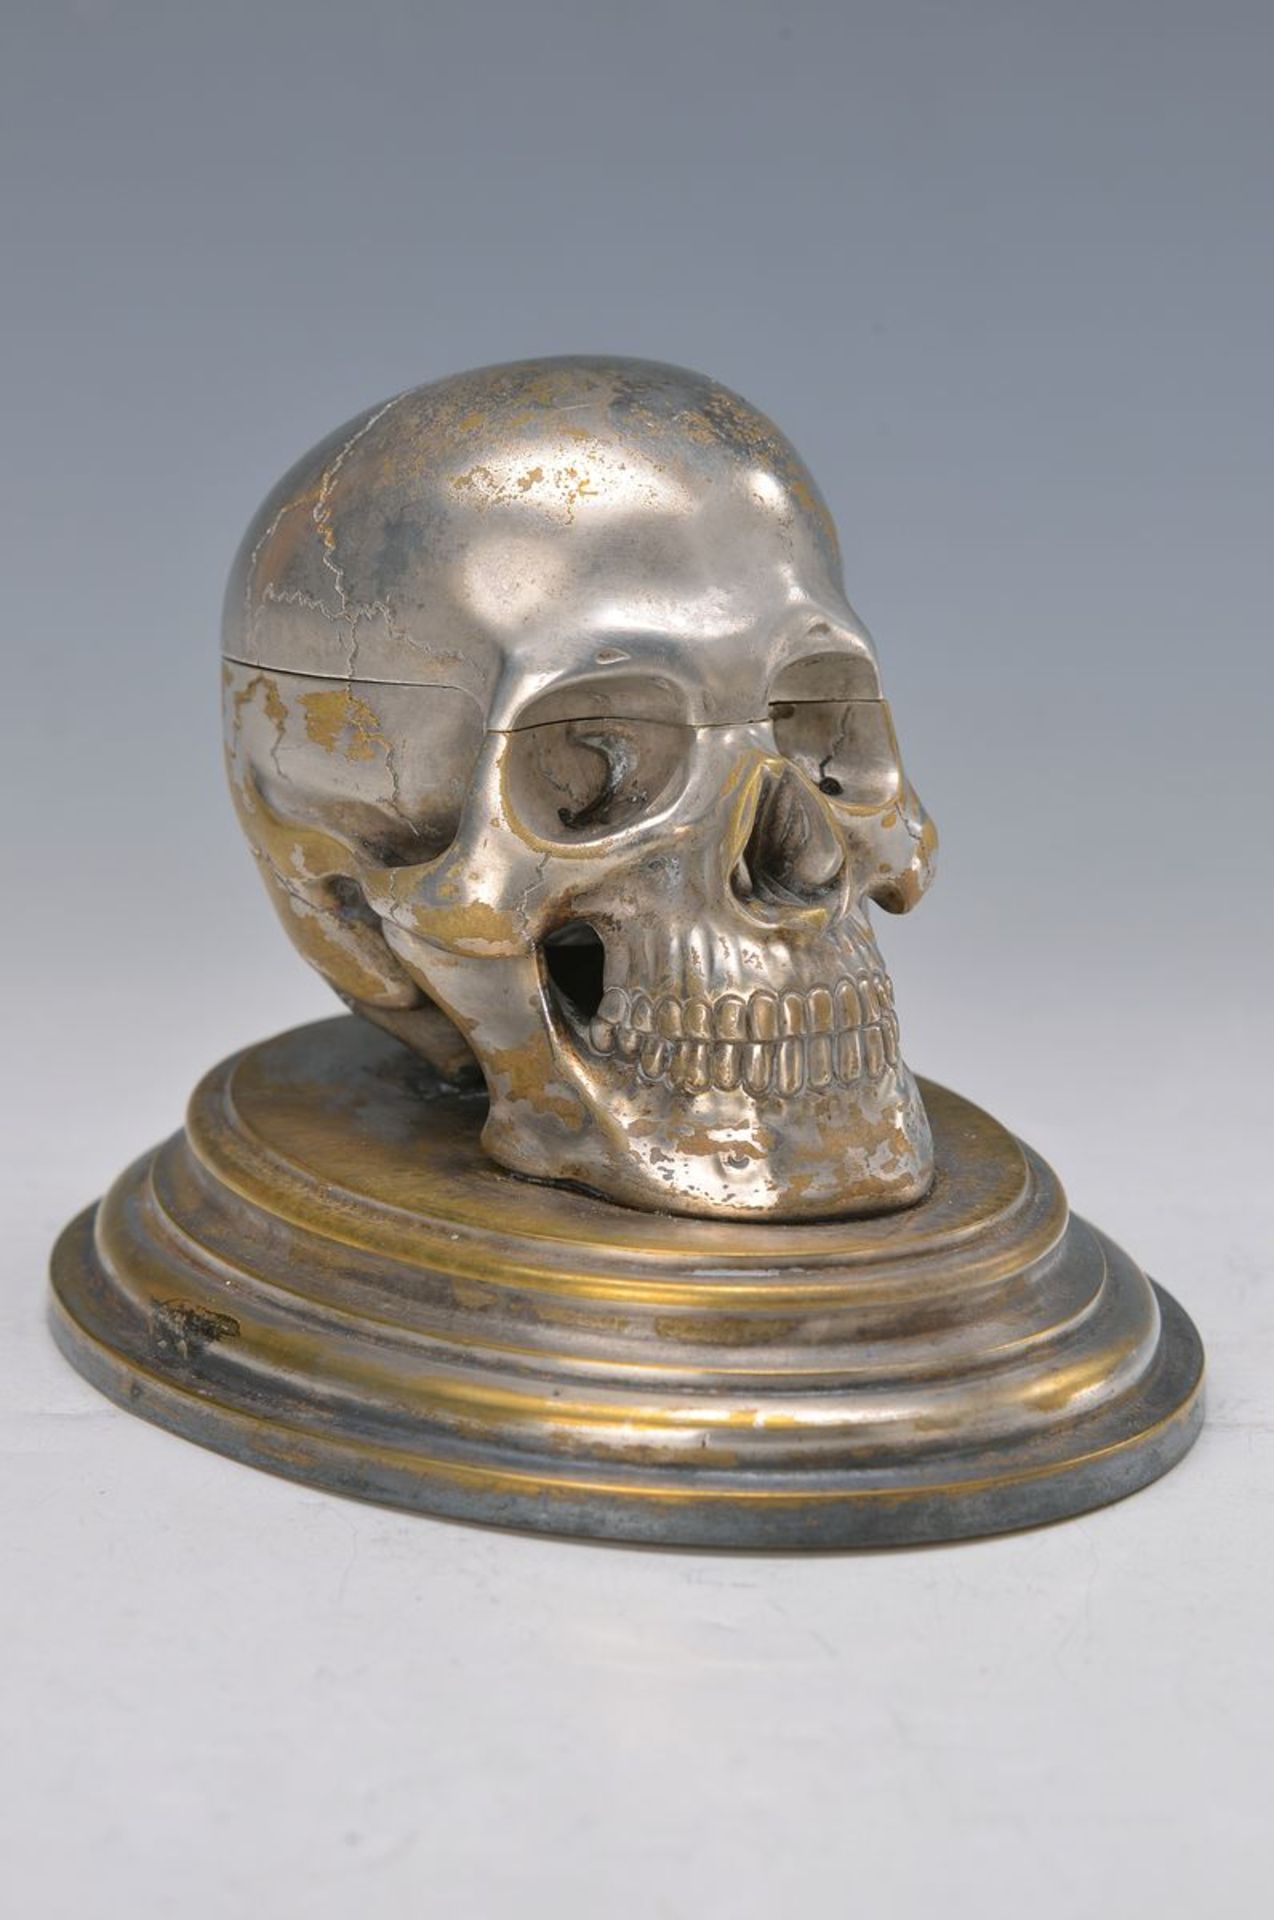 inkstand in shape of a scull, first third of 20th c., brass nickel plated, interior with ceramic